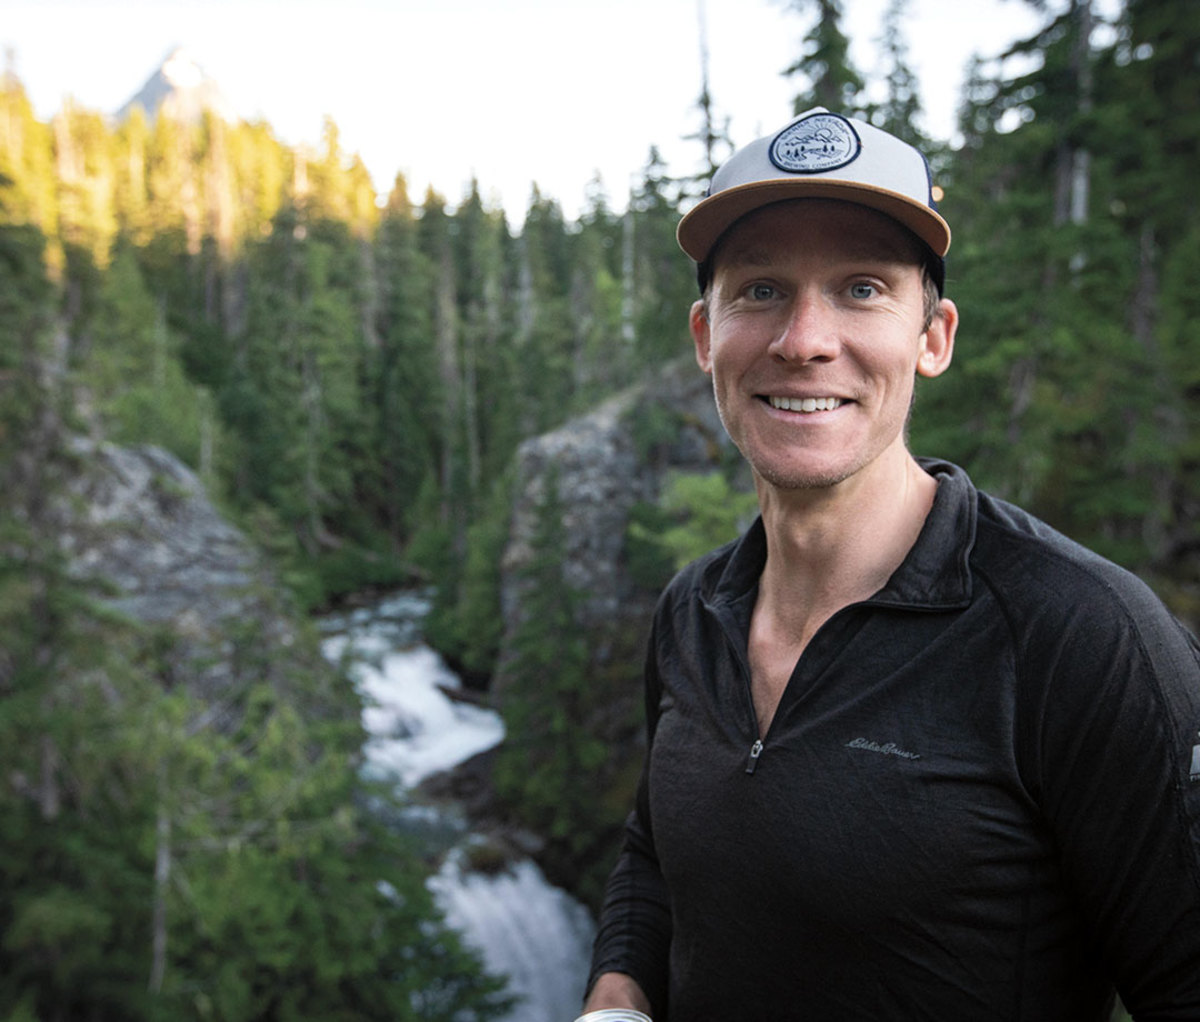 Portrait of Chris Korbulic, one of the world’s most renowned expedition whitewater kayakers.